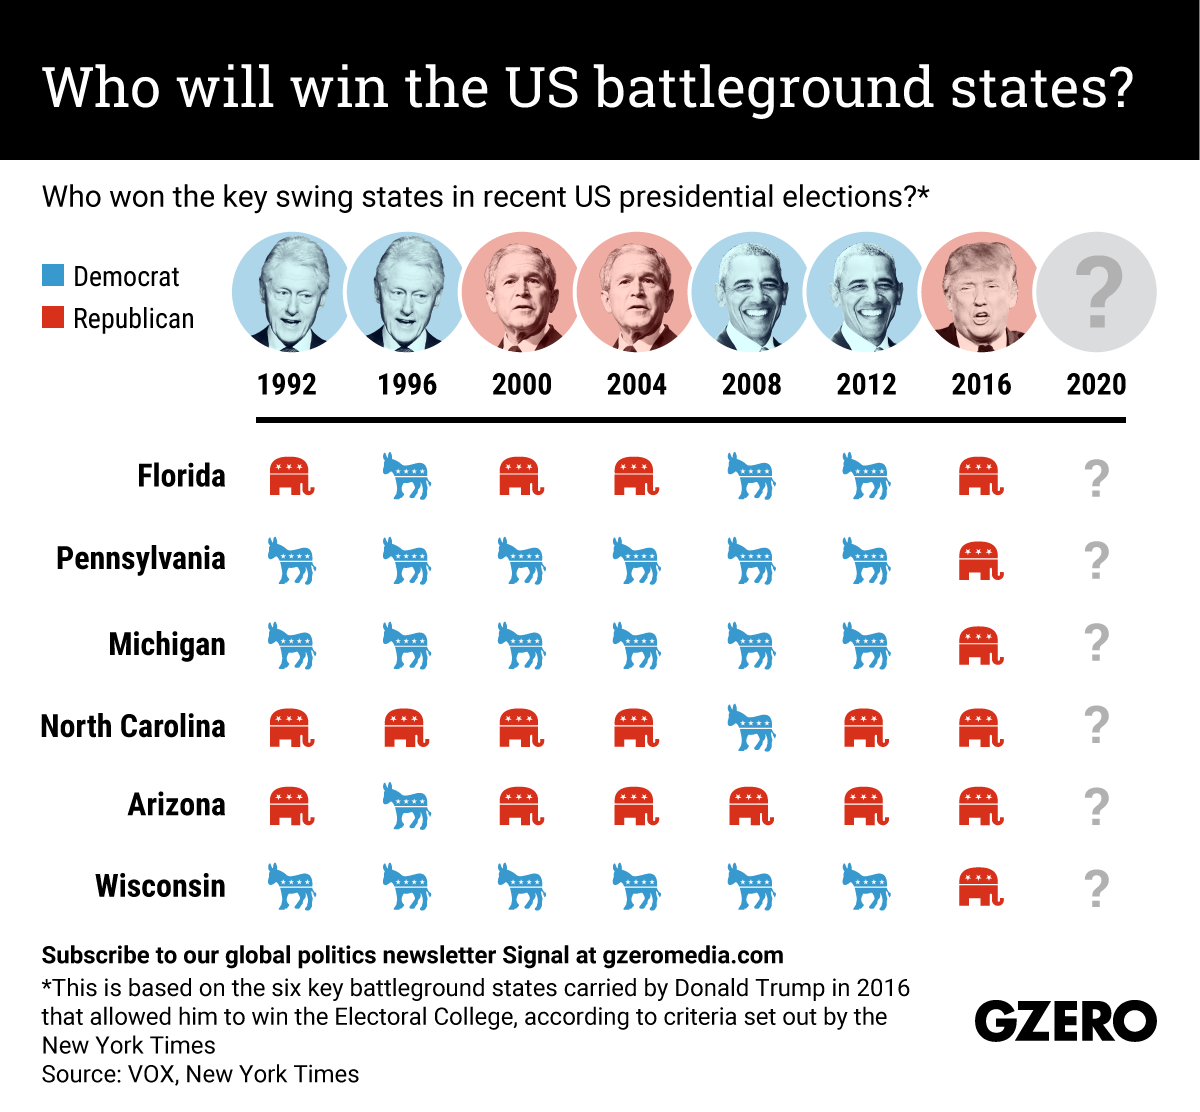 The Graphic Truth: Who will win the US battleground states?